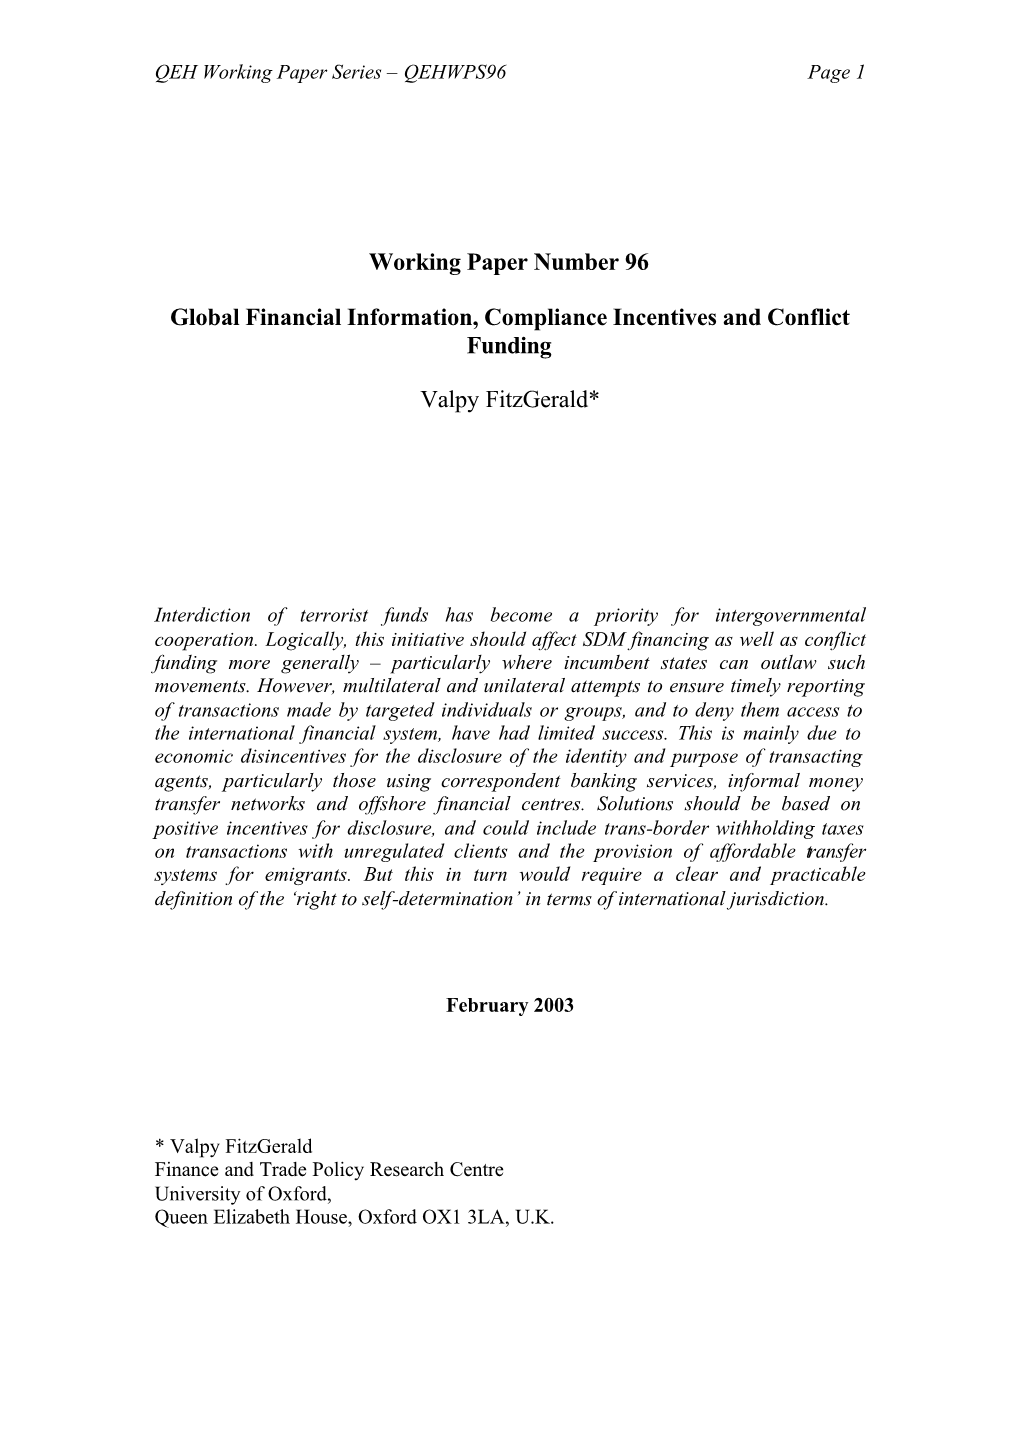 Working Paper Number 96 Global Financial